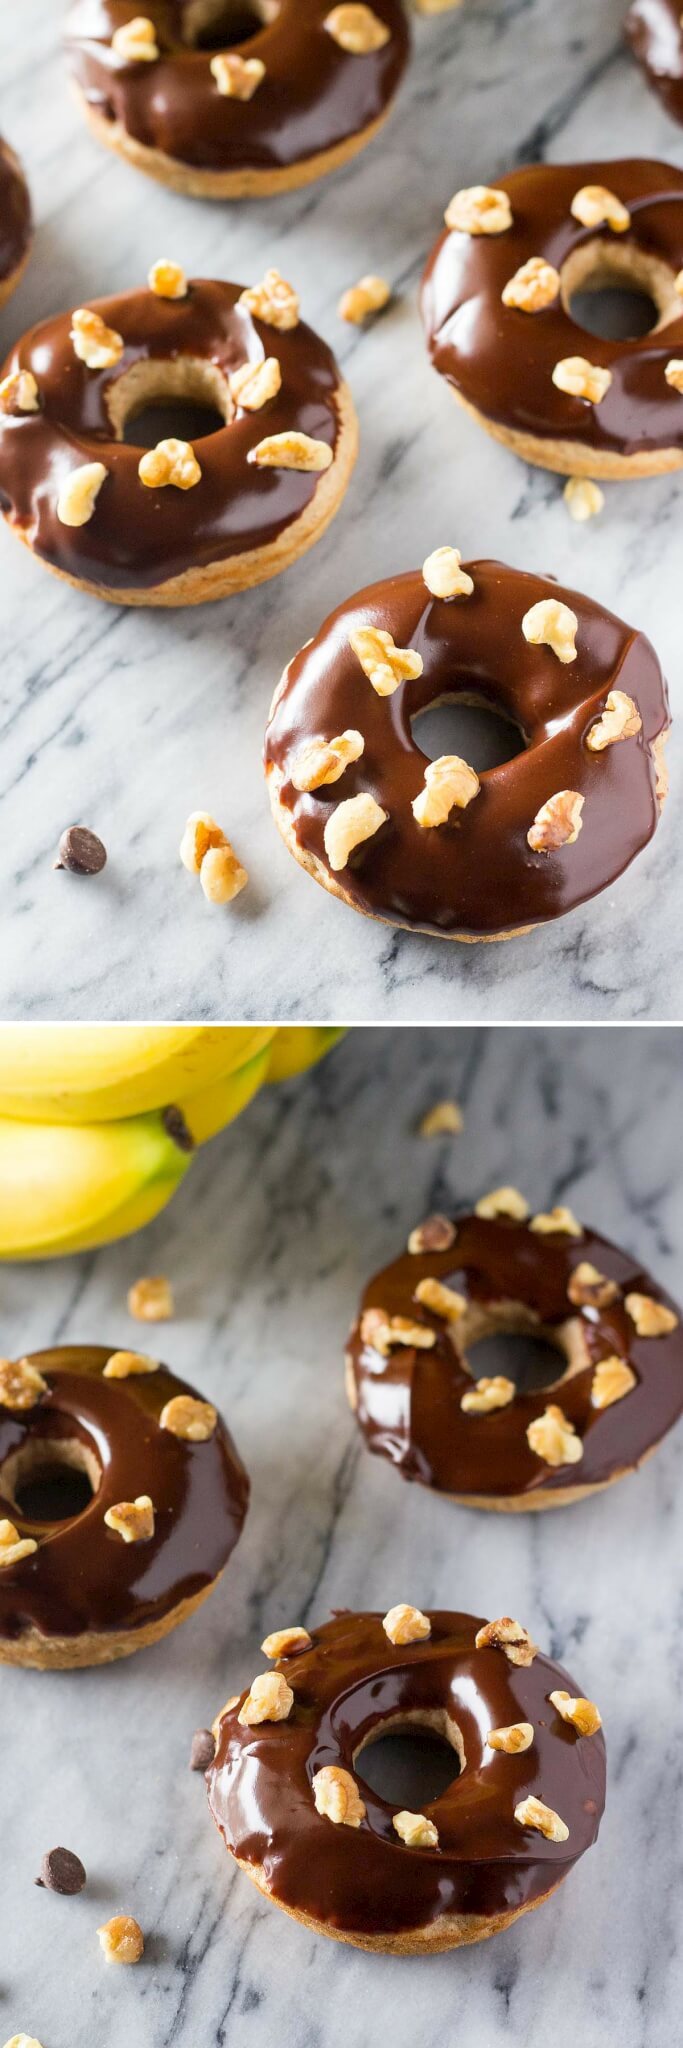 Banana Doughnuts with Chocolate Glaze - Baked not fried with big banana bread flavor & so perfect for breakfast!